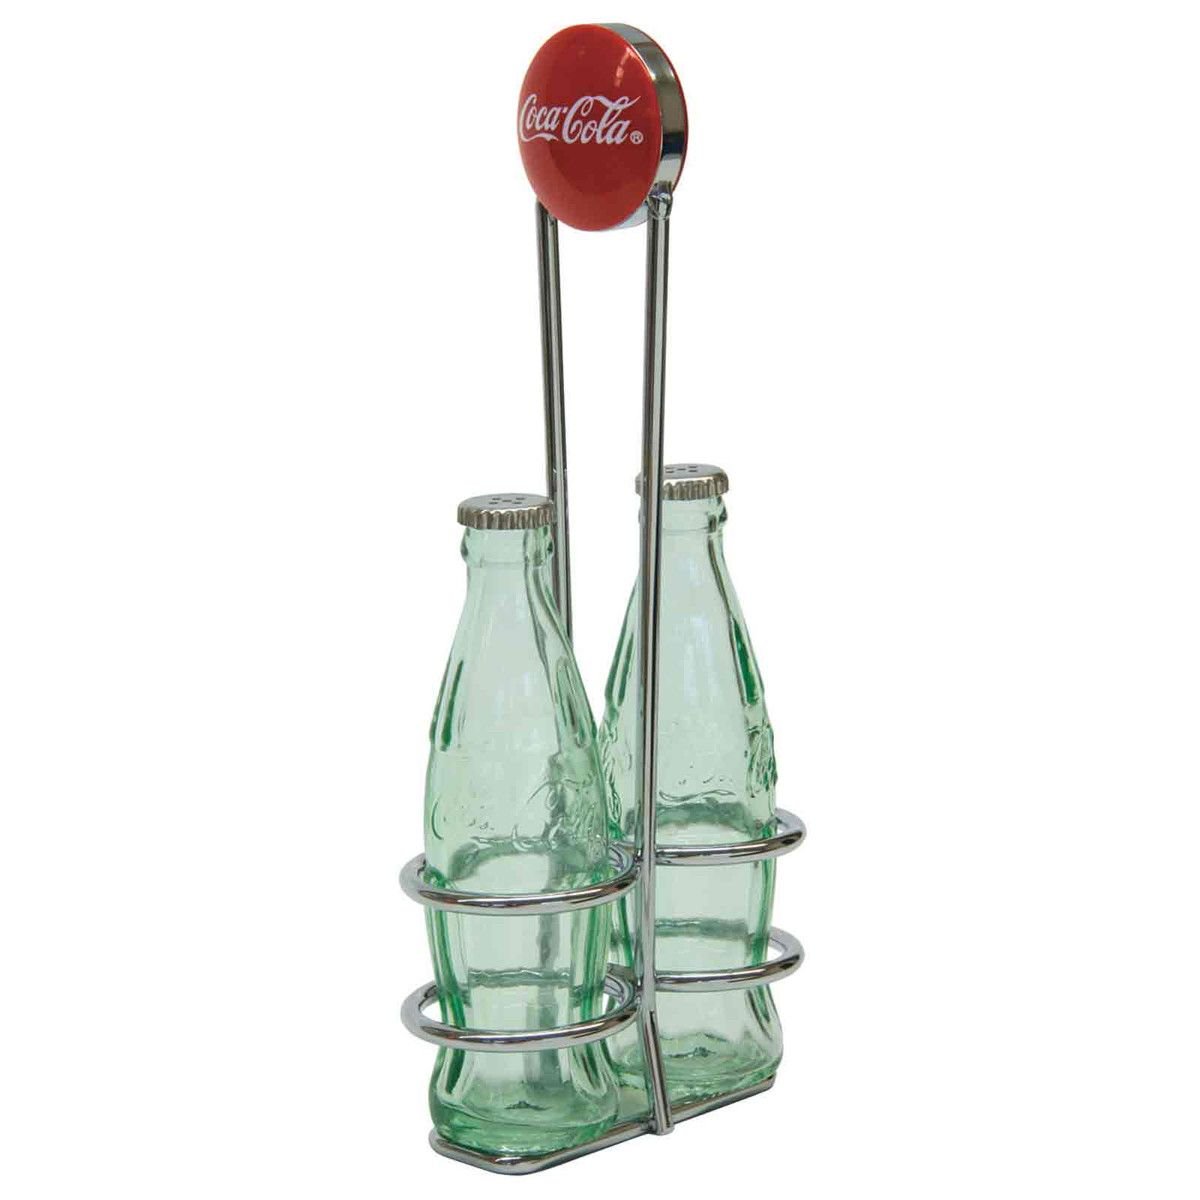 1 oz Coca-Cola Salt & Pepper Shakers - Green Tinted Glass with Retro Rack, TableCraft